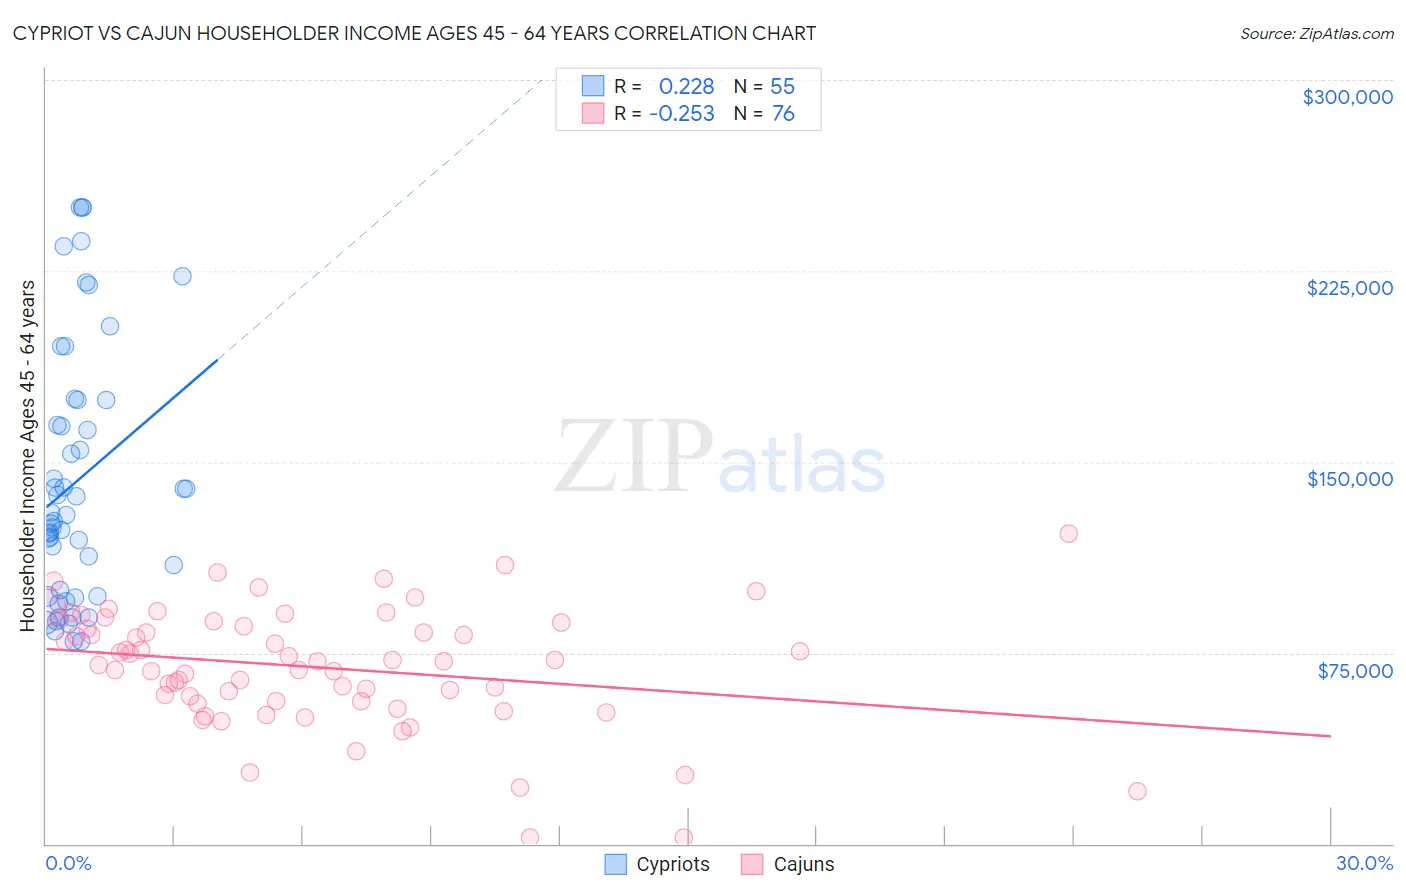 Cypriot vs Cajun Householder Income Ages 45 - 64 years